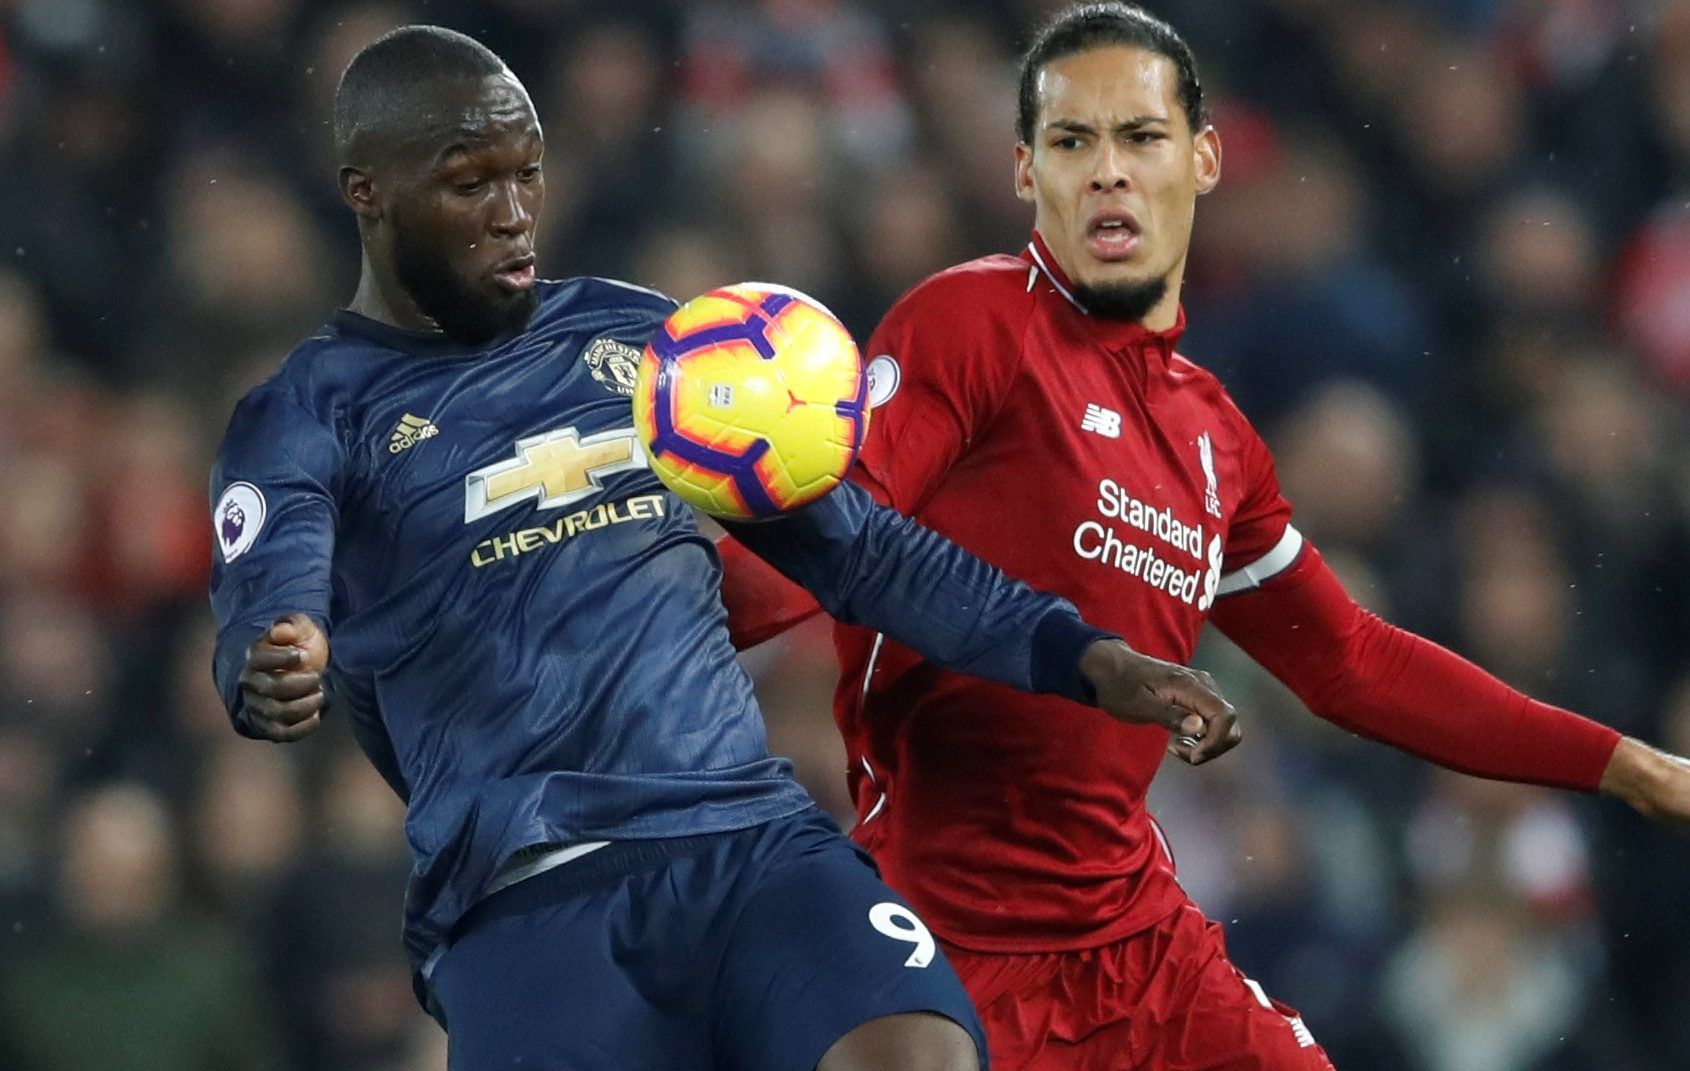 Soccer Football - Premier League - Liverpool v Manchester United - Anfield, Liverpool, Britain - December 16, 2018  Liverpool's Virgil van Dijk in action with Manchester United's Romelu Lukaku   Action Images via Reuters/Carl Recine  EDITORIAL USE ONLY. No use with unauthorized audio, video, data, fixture lists, club/league logos or 